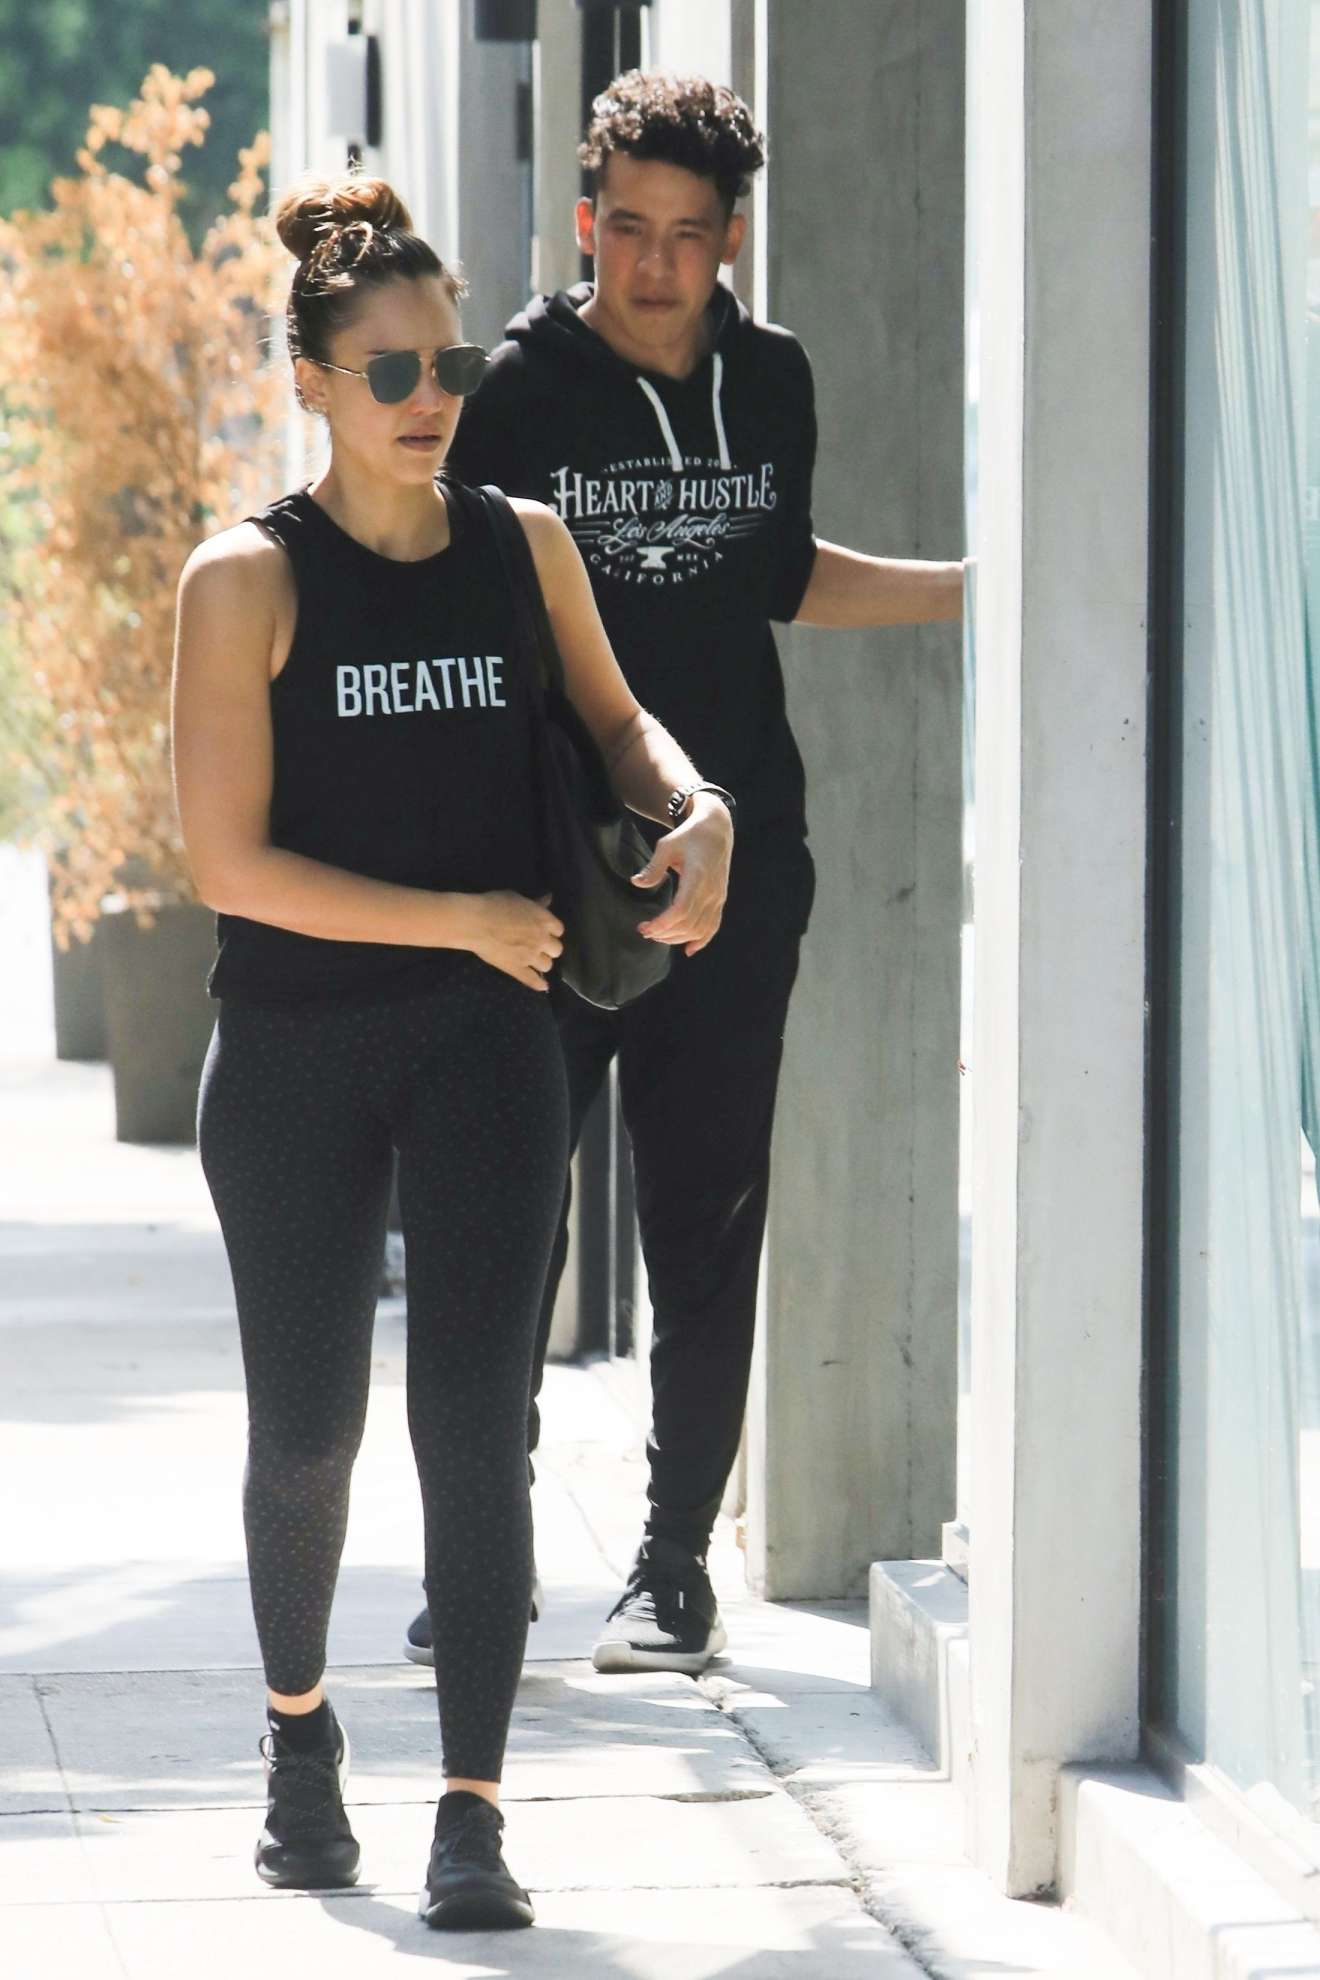 JESSICA ALBA Leaves a Gym in West Hollywood 10/22/2018 